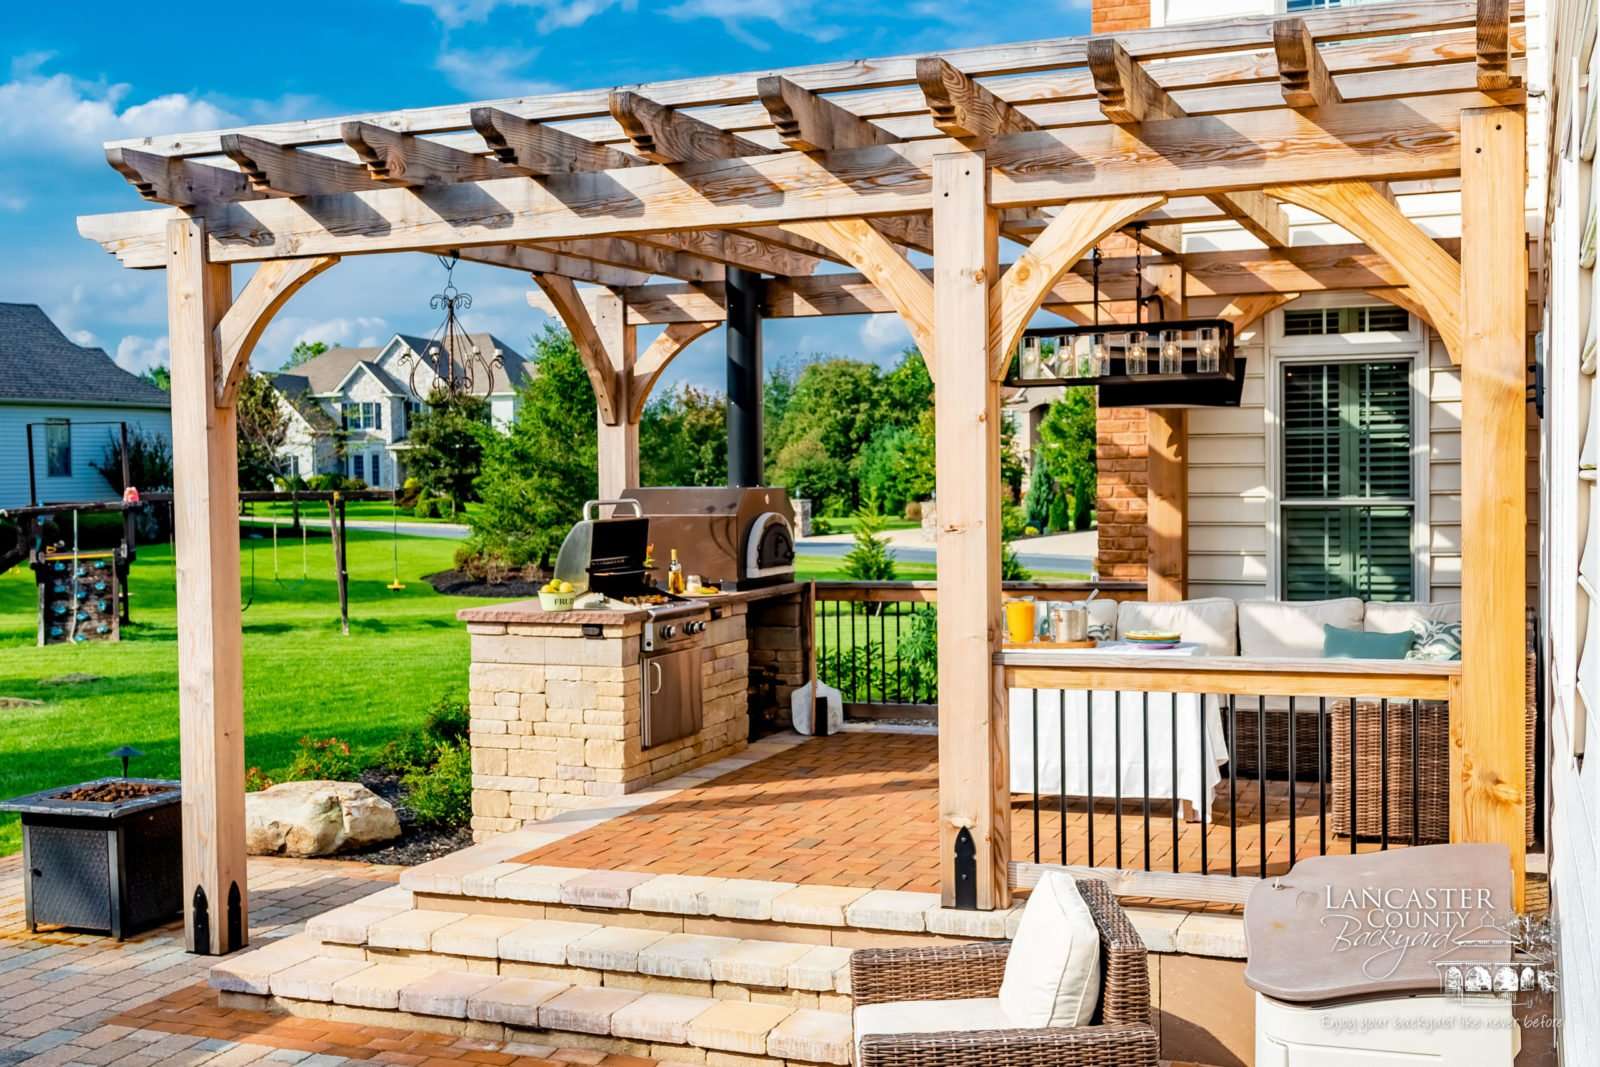 Pergola With an Outdoor Kitchen